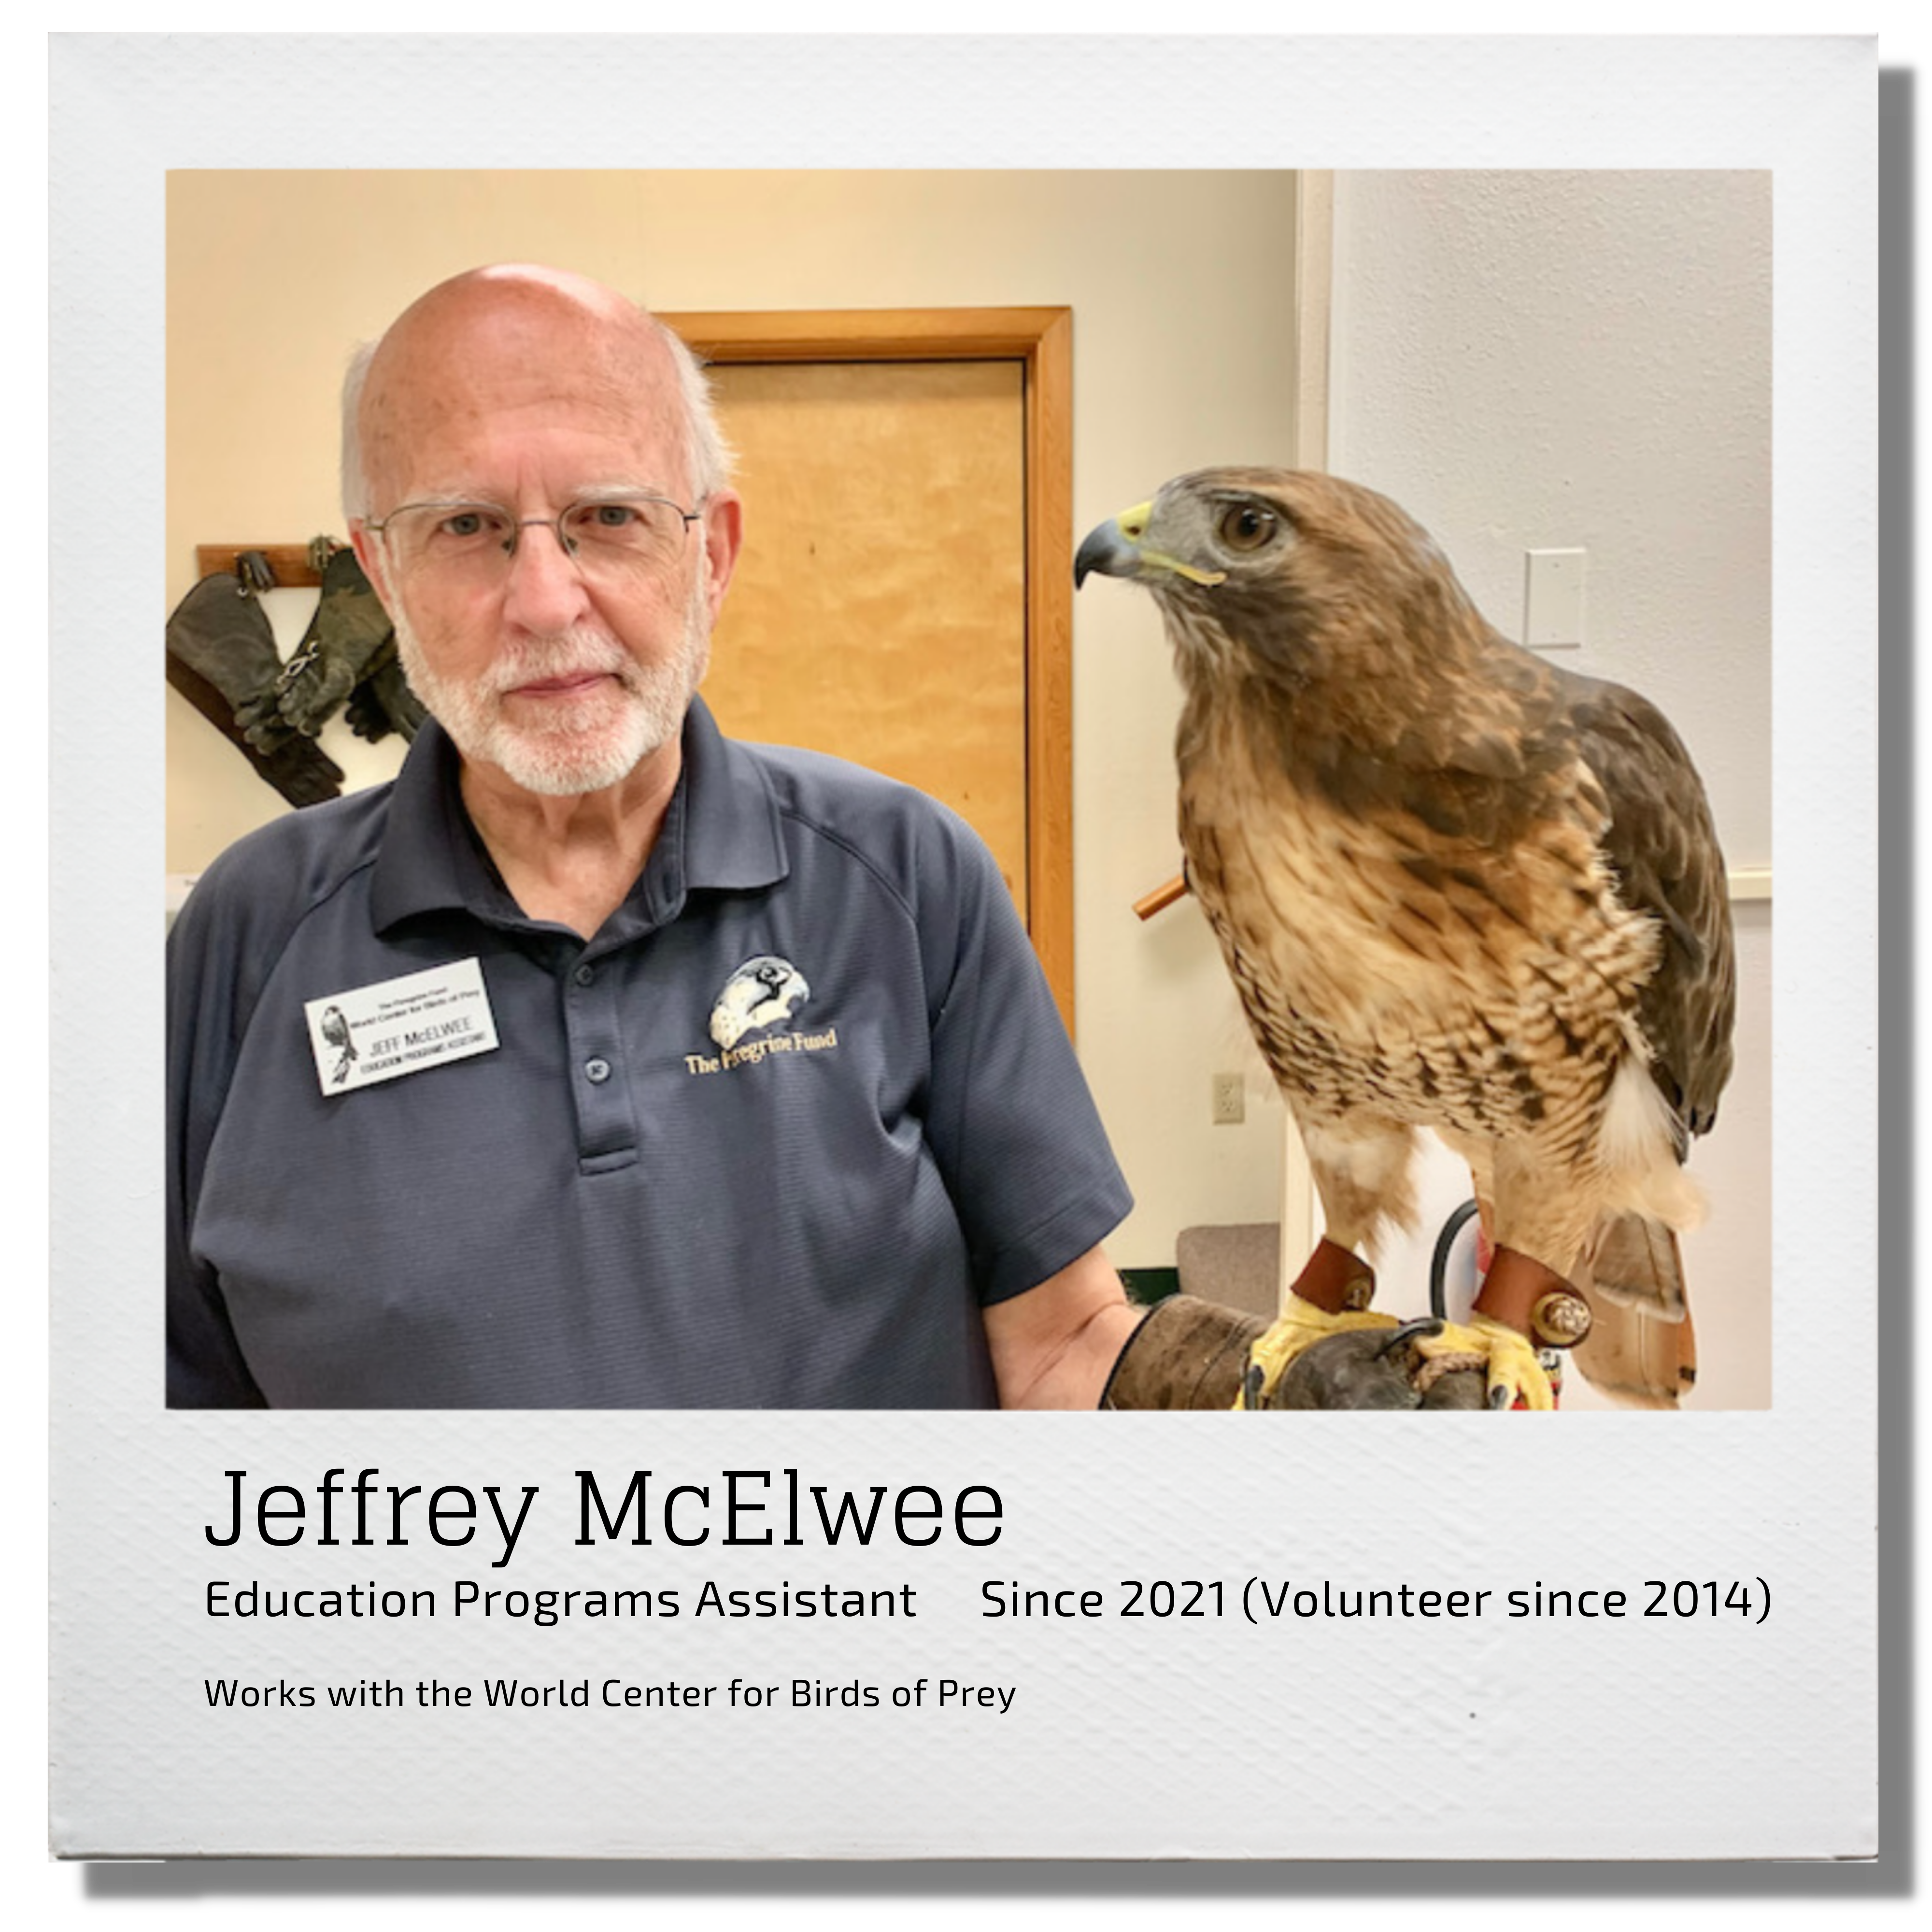 Jeffrey McElwee Education Programs Assistant since 2021 (volunteer since 2014) Works with the World Center for Birds of Prey